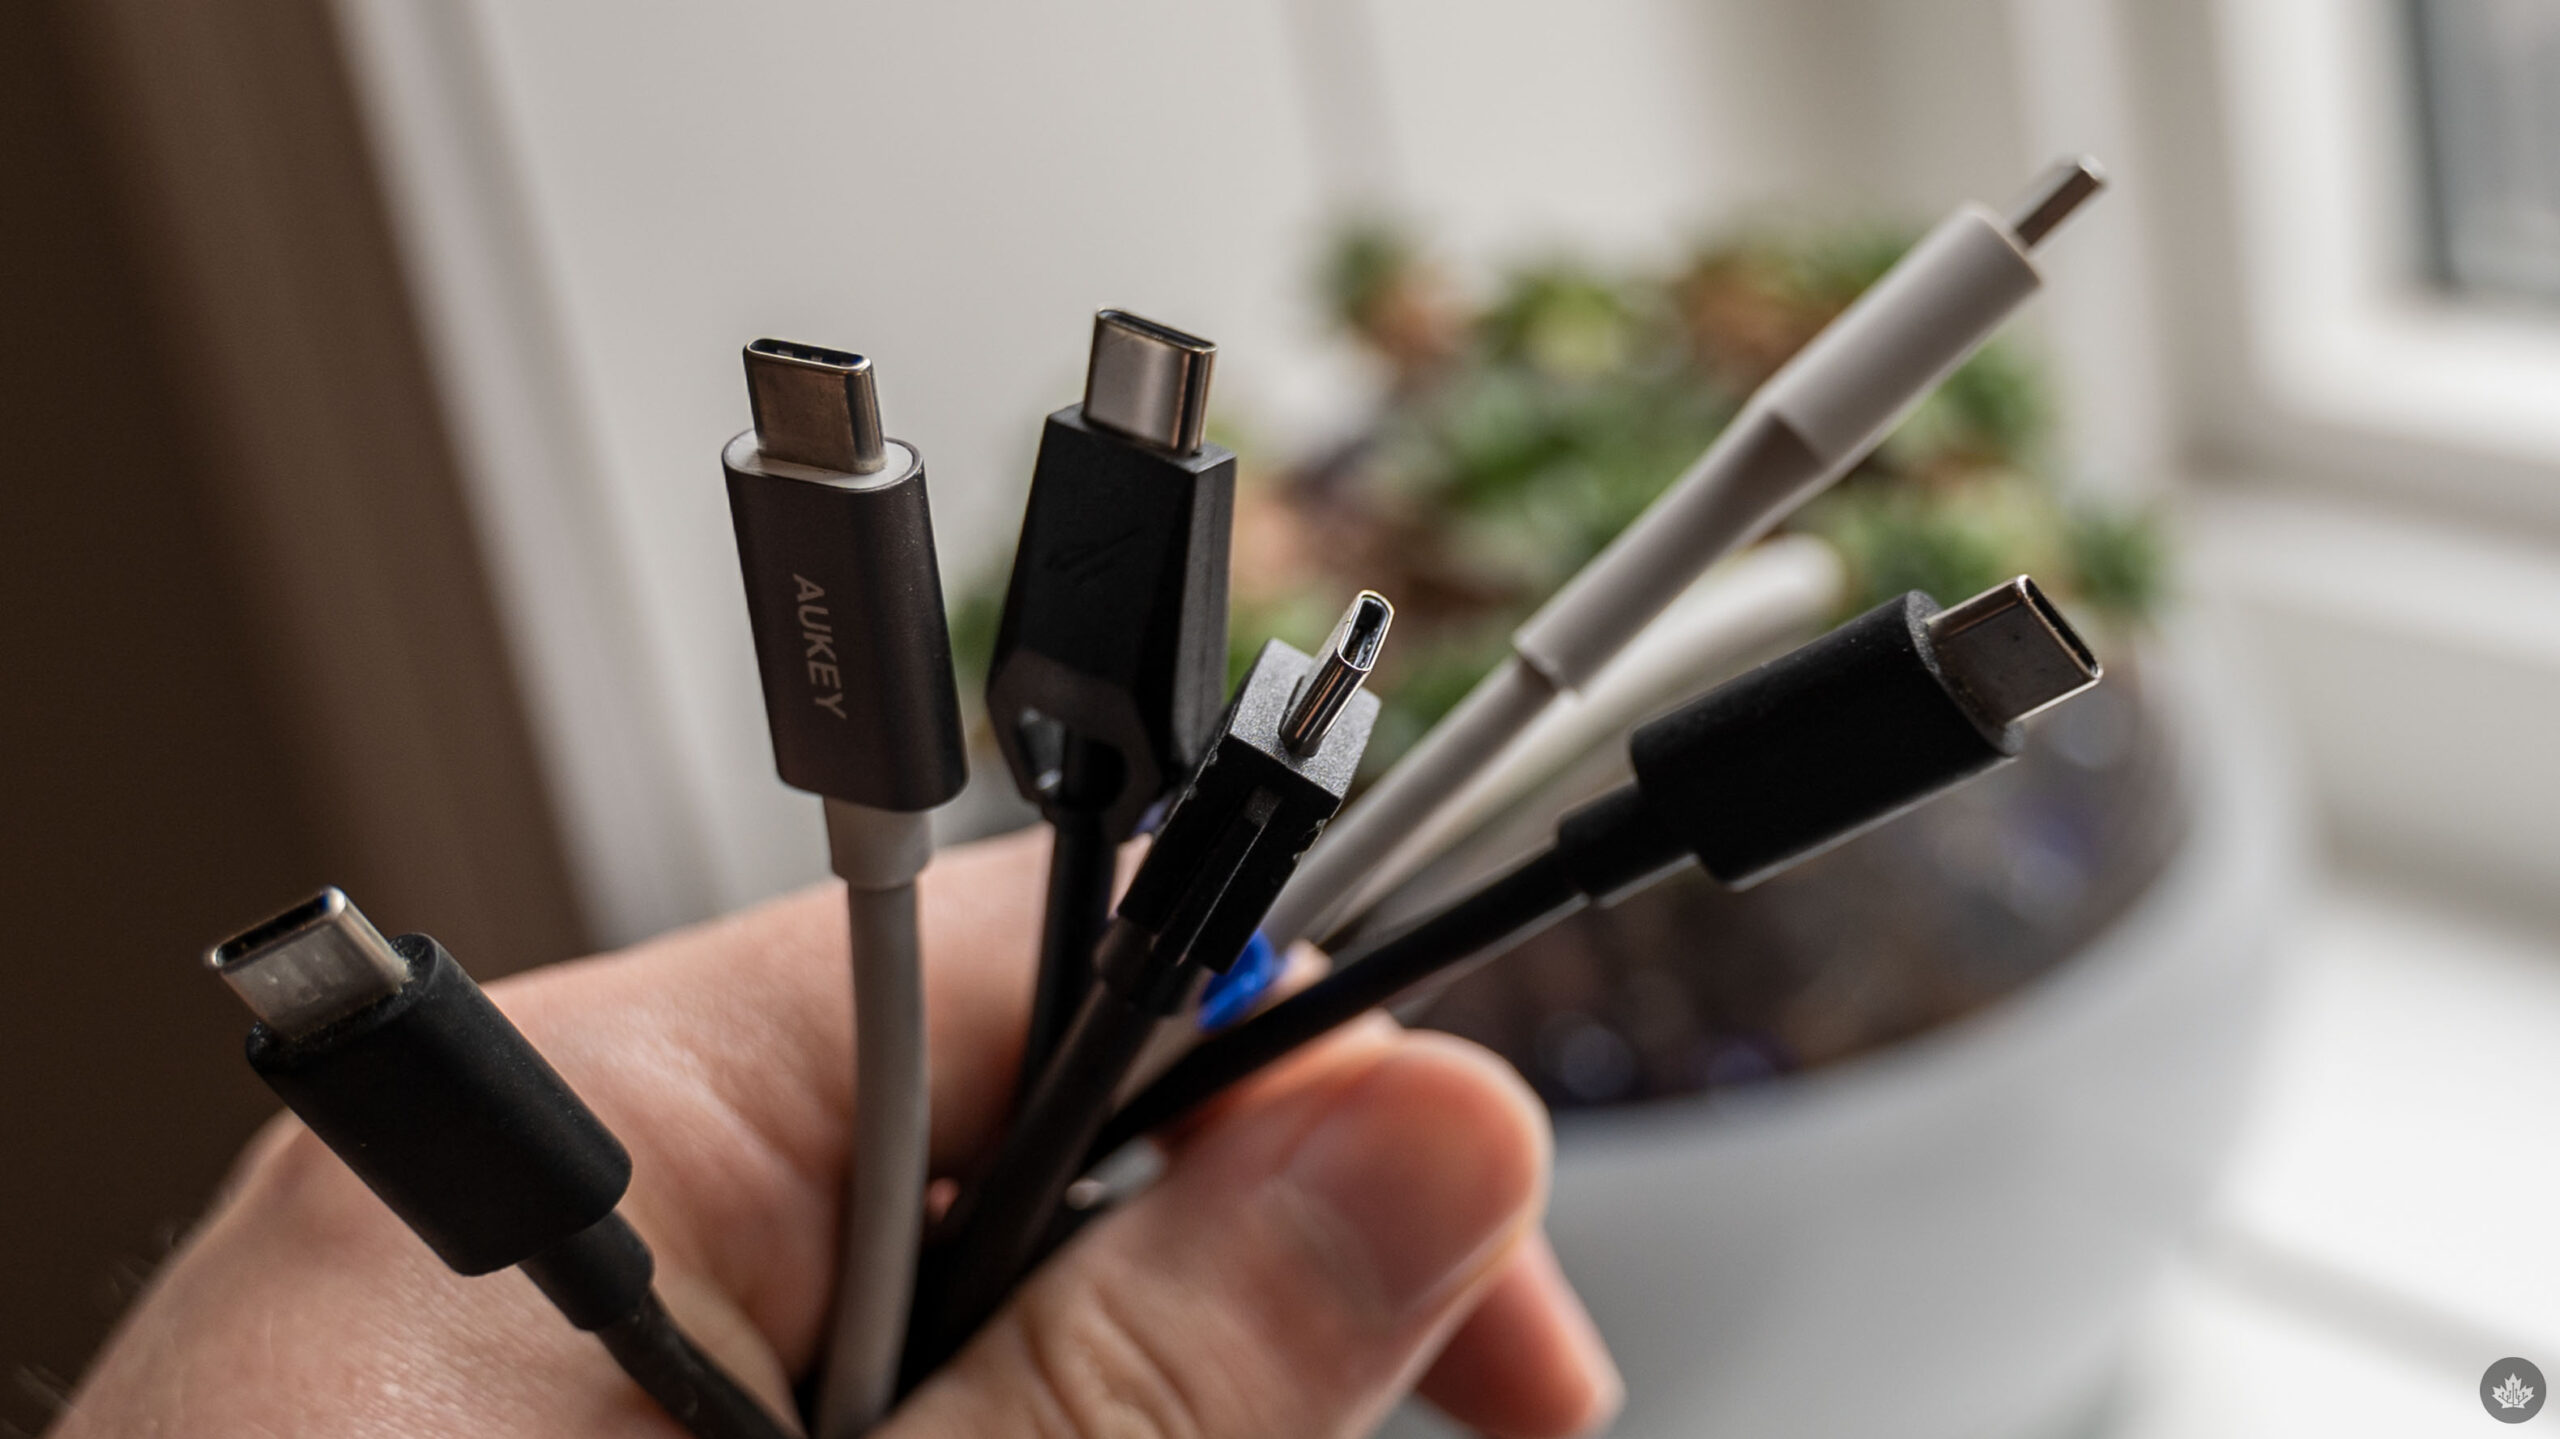 EU rules will bring USB-C iPhone, but as soon as you'd